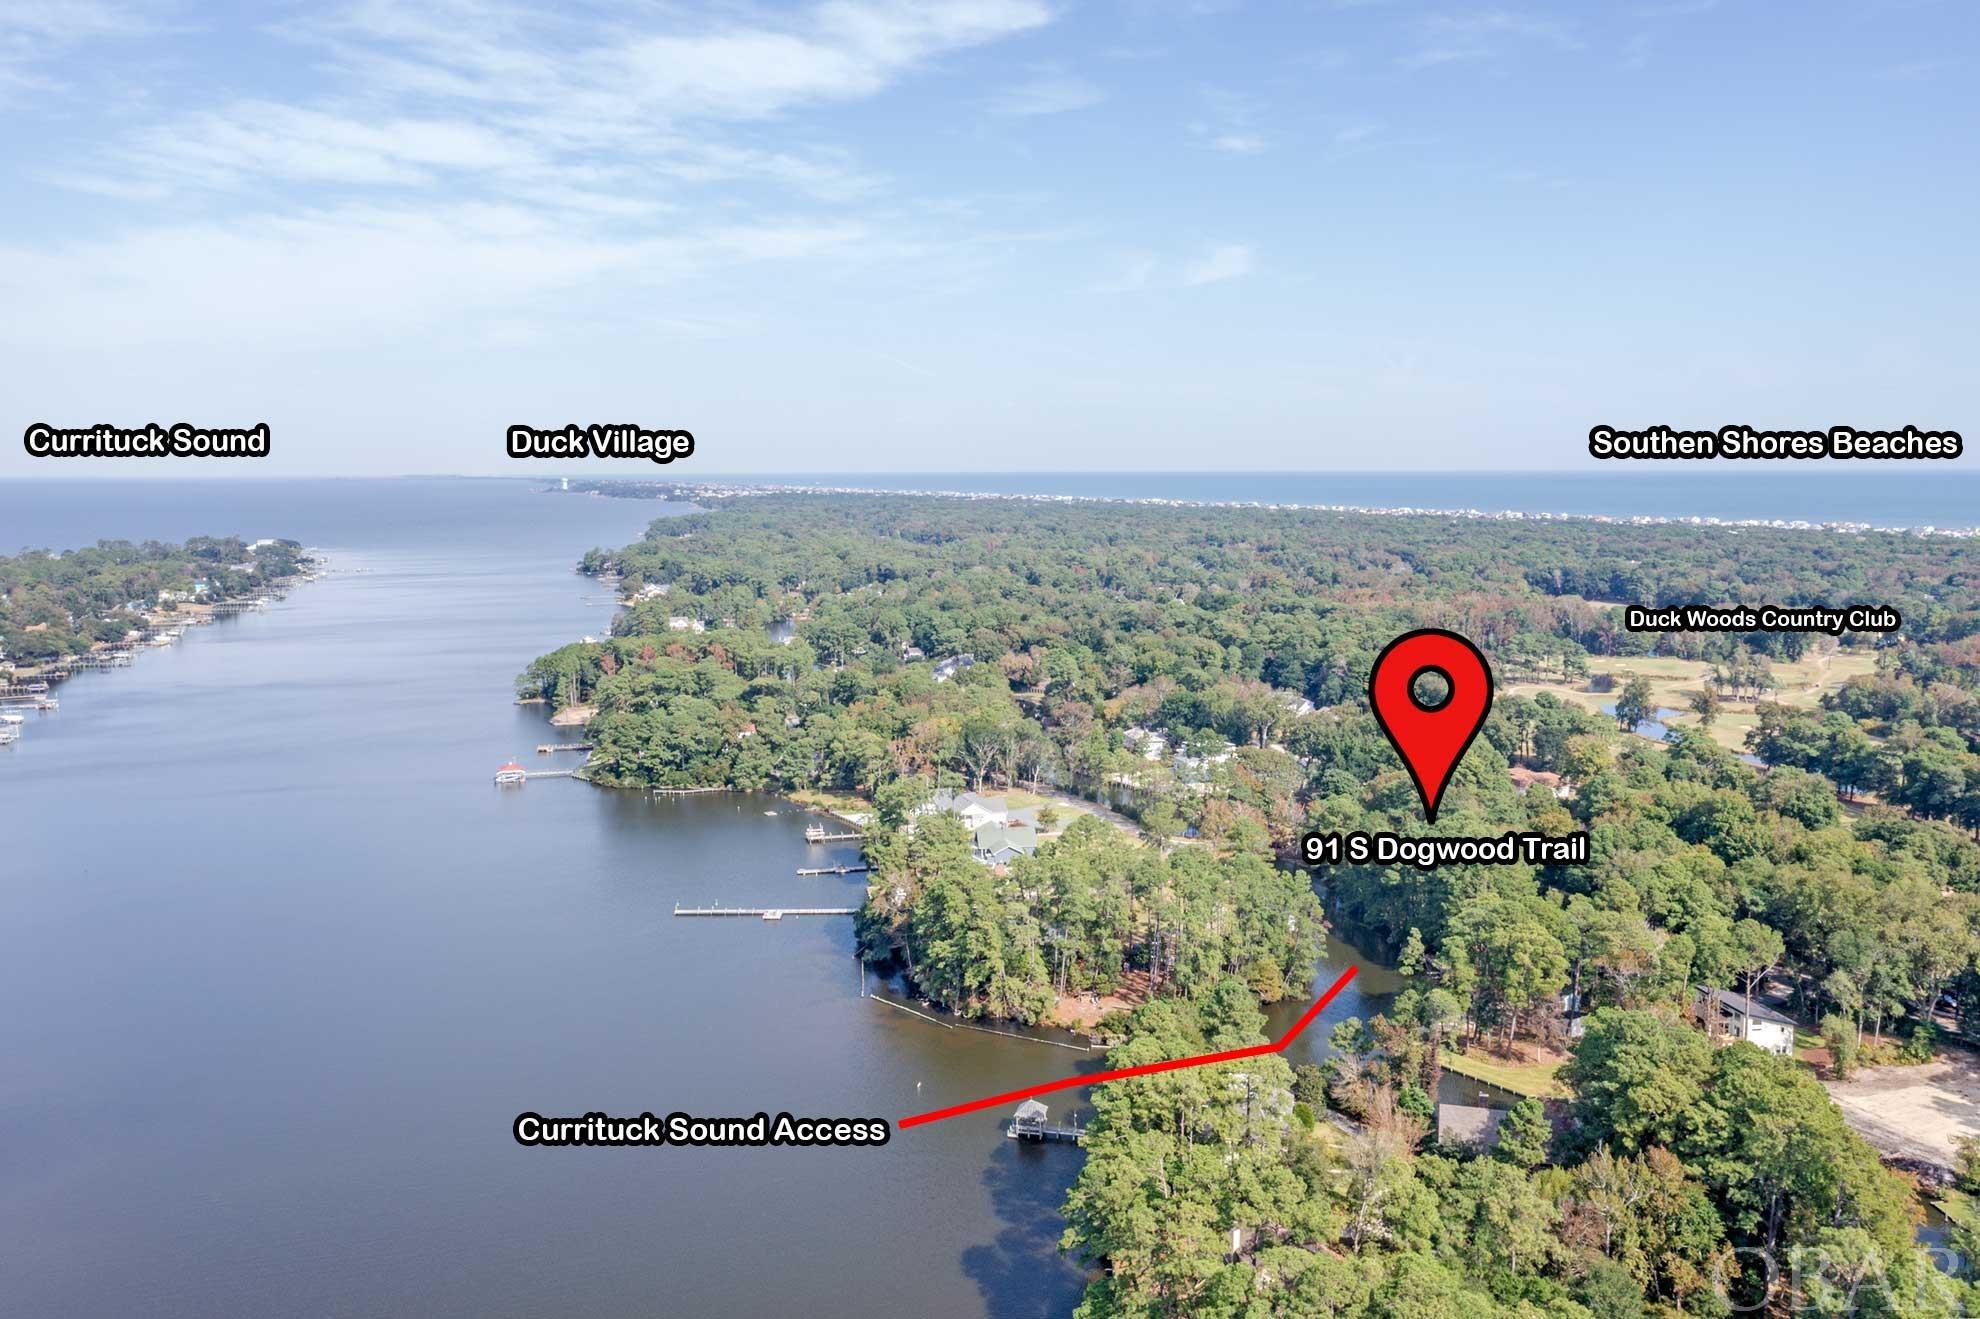 LARGE "SEMI-SOUNDFRONT" DEEP WATER CANALFRONT LOT IN SOUTHERN SHORES *** NO BRIDGE TO PASS UNDER TO GET OUT TO THE SOUND SO YOU CAN HAVE A LARGER BOAT IN THIS LOCALE *** LAND IS APPROX 21,000SF (.5 ACRES) AND IN "X" FLOOD ZONE, SO LIKELY NO FLOOD INSURANCE REQUIRED *** GREAT LOCATION WITHIN THE SOUTHERN SHORES COMMUNITY ... NICE HOMES SURROUND, EVEN NICER NEIGHBORS! *** FABULOUS LOCATION ON WHICH TO BUILD YOUR DREAM HOME ... IMAGINE WALKING OUT YOUR BACK DOOR TO YOUR BOAT, AND THE QUICK RIDE OUT TO CATCH THE CURRITUCK SOUND SUNSETS! *** FROM HERE YOU CAN ENJOY ALL THAT THE OUTER BANKS AREA HAS TO OFFER, AND YOU CAN START WITH ALL THAT IS OFFERED RIGHT HERE IN SOUTHERN SHORES ... CHECK OUT THE 2 MAIN BEACH ACCESSES A) DIRECT BEACH ACCESS DOWN E. DOGWOOD TRAIL WITH ITS NICE DUNE DECK (THIS IS WHERE THE NEIGHBORS MOSTLY GO) & LIFE- GUARD IN SUMMER ... OR TO THE HILLCREST BEACH ACCESS W/ PARKING FOR ABOUT 60 PLUS, FACILITIES, LIFEGUARD IN SUMMER, TWO DUNE DECKS, VOLLEYBALL COURT, OUTSIDE SHOWERS, HANDICAP RAMP DOWN TO BEACH ... IT DOESN'T GET ANY BETTER THAN THAT! *** THERE ARE 3 BOAT MARINA'S - ALL WITHIN MINUTES! ... ONE WITH A BOAT RAMP * JOIN THE BOAT CLUB AND MAKE FRIENDS *** WONDERFUL IN SUMMER AND EVEN NICER OFF SEASON *** 2 SOUNDFRONT BEACH PARKS, DUNE AREA BASKETBALL COURT, PLAYPARK *** OUTDOOR COMMUNITY TENNIS * TENNIS & BOAT CLUB/SLIPS ARE ADDITIONAL, BUT IT IS NOT REQUIRED TO HAVE BOAT CLUB MEMBERSHIP TO ACCESS THE BOAT RAMP *** THE SOUTHERN SHORES CIVIC ASSOCIATION (SSCA) IS OPTIONAL BUT COST ROUGHLY JUST $65 PER YEAR ... EVERYONE JOINS * SIDEWALK THROUGH ENTIRE TOWN ALONG DUCK ROAD - THAT ALONG WITH ALL OF THE COMMUNITY ROADS MAKES IT GREAT FOR BIKING OR RUNNING *** DON'T WANT TO MISS SHOPPING IN NEARBY DUCK ... OR VISIT THE DUCK TOWN GREEN FOR THE ANNUAL OUTDOOR CONCERTS (SUCH AS THE ANNUAL DIUCK JAZZ FESTIVAL IN OCTOBER), OR THE NEWER SOUNDFRONT BOARDWALK *** KITTY HAWK STORES ARE ALSO CLOSE BY -AND- YOU CAN GET TO FOOD LION, CVS, WALMART, ABC, HARRIS TEETER, HOME DEPOT, STARBUCKS & MORE IN MINUTES! *** CLOSE TO WRIGHT MEMORIAL BRIDGE - YOU CAN GET THERE VIA S. DOGWOOD TRAIL *** ALSO JUST A 2 MINUTE DRIVE TO THE DUCK WOODS COUNTRY CLUB (GOLF & TENNIS ... AND HAS NEW PICKLE BALL COURTS UNDER CONSTRUCTION (FEE TO JOIN - MULTIPLE MEMBERSHIP LEVELS) *** THE OUTER BANKS IS FILLED WITH EXCITING THINGS TO DO AND SEE ... THE OCEAN, LIGHTHOUSES, WRIGHT BROTHERS MONUMENT, THE LOST COLONY, CAPE HATTERAS NATIONAL SEASHORE, CAROLINA BLUE SKIES, AMAZING SUNSETS & SO MUCH MORE *** ARE YOU THINKING ABOUT LIVING THE DREAM? *** PURCHASE LOT NOW AND BUILD, AND GET STARTED ... OR, PURCHASE NOW AND HOLD FOR FUTURE PLANS ... NOTE: THERE IS A SMALL LAND PARCEL THAT IS OWNED BY THE TOWN ON THE NORTH ADJACENT SIDE - FOR ADDED BUFFER *** THIS IS A GREAT TIME TO ENTER THE MARKET *** THE LOCATION IS WORTHY OF A HOME OF SIZE - SHOULD BE ROOM FOR POOL *** 200 FEET ON S. DOGWOOD TRAIL AND 205 FEET ON CANAL *** SUNSET REFLECTIONS OVER THE WATER IS NOTHING SHORT OF BREATHTAKING! ... LOCATION IS EXCELLENT ... COME SEE!